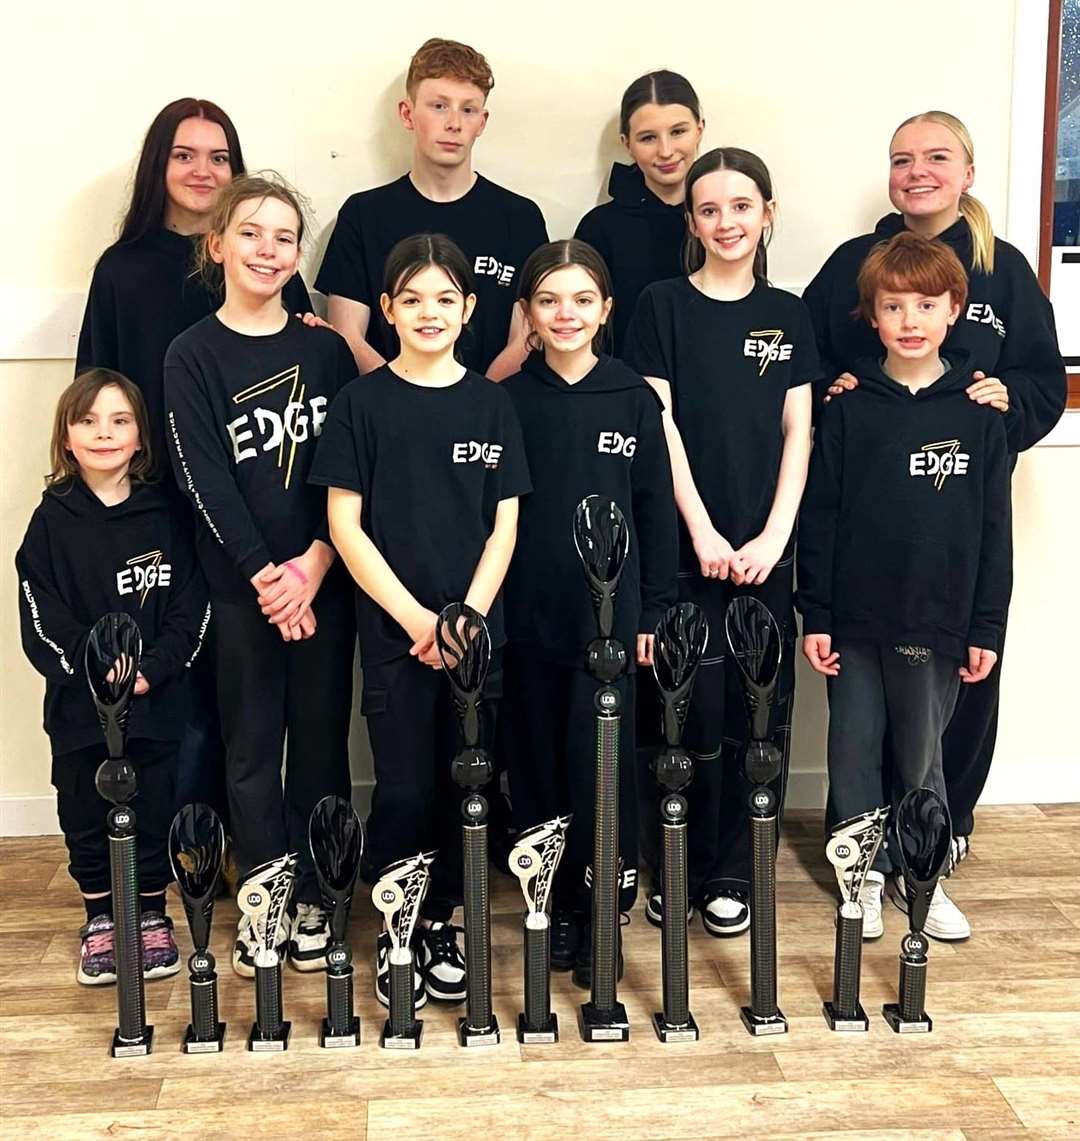 The Edge dance team pictured with their trophies. From left at front, Amber Gibson, Eilidh Sinclair, Iris Cormack, Fearne Coghill, Molly Cannop and Owen Sinclair. Back row from left, instructor Laya Cowie, Craig Campbell, Kelsey Norquay, and instructor Kelsey Ross. Missing from the photo is instructor and dancer Chloe Macgregor. Picture supplied